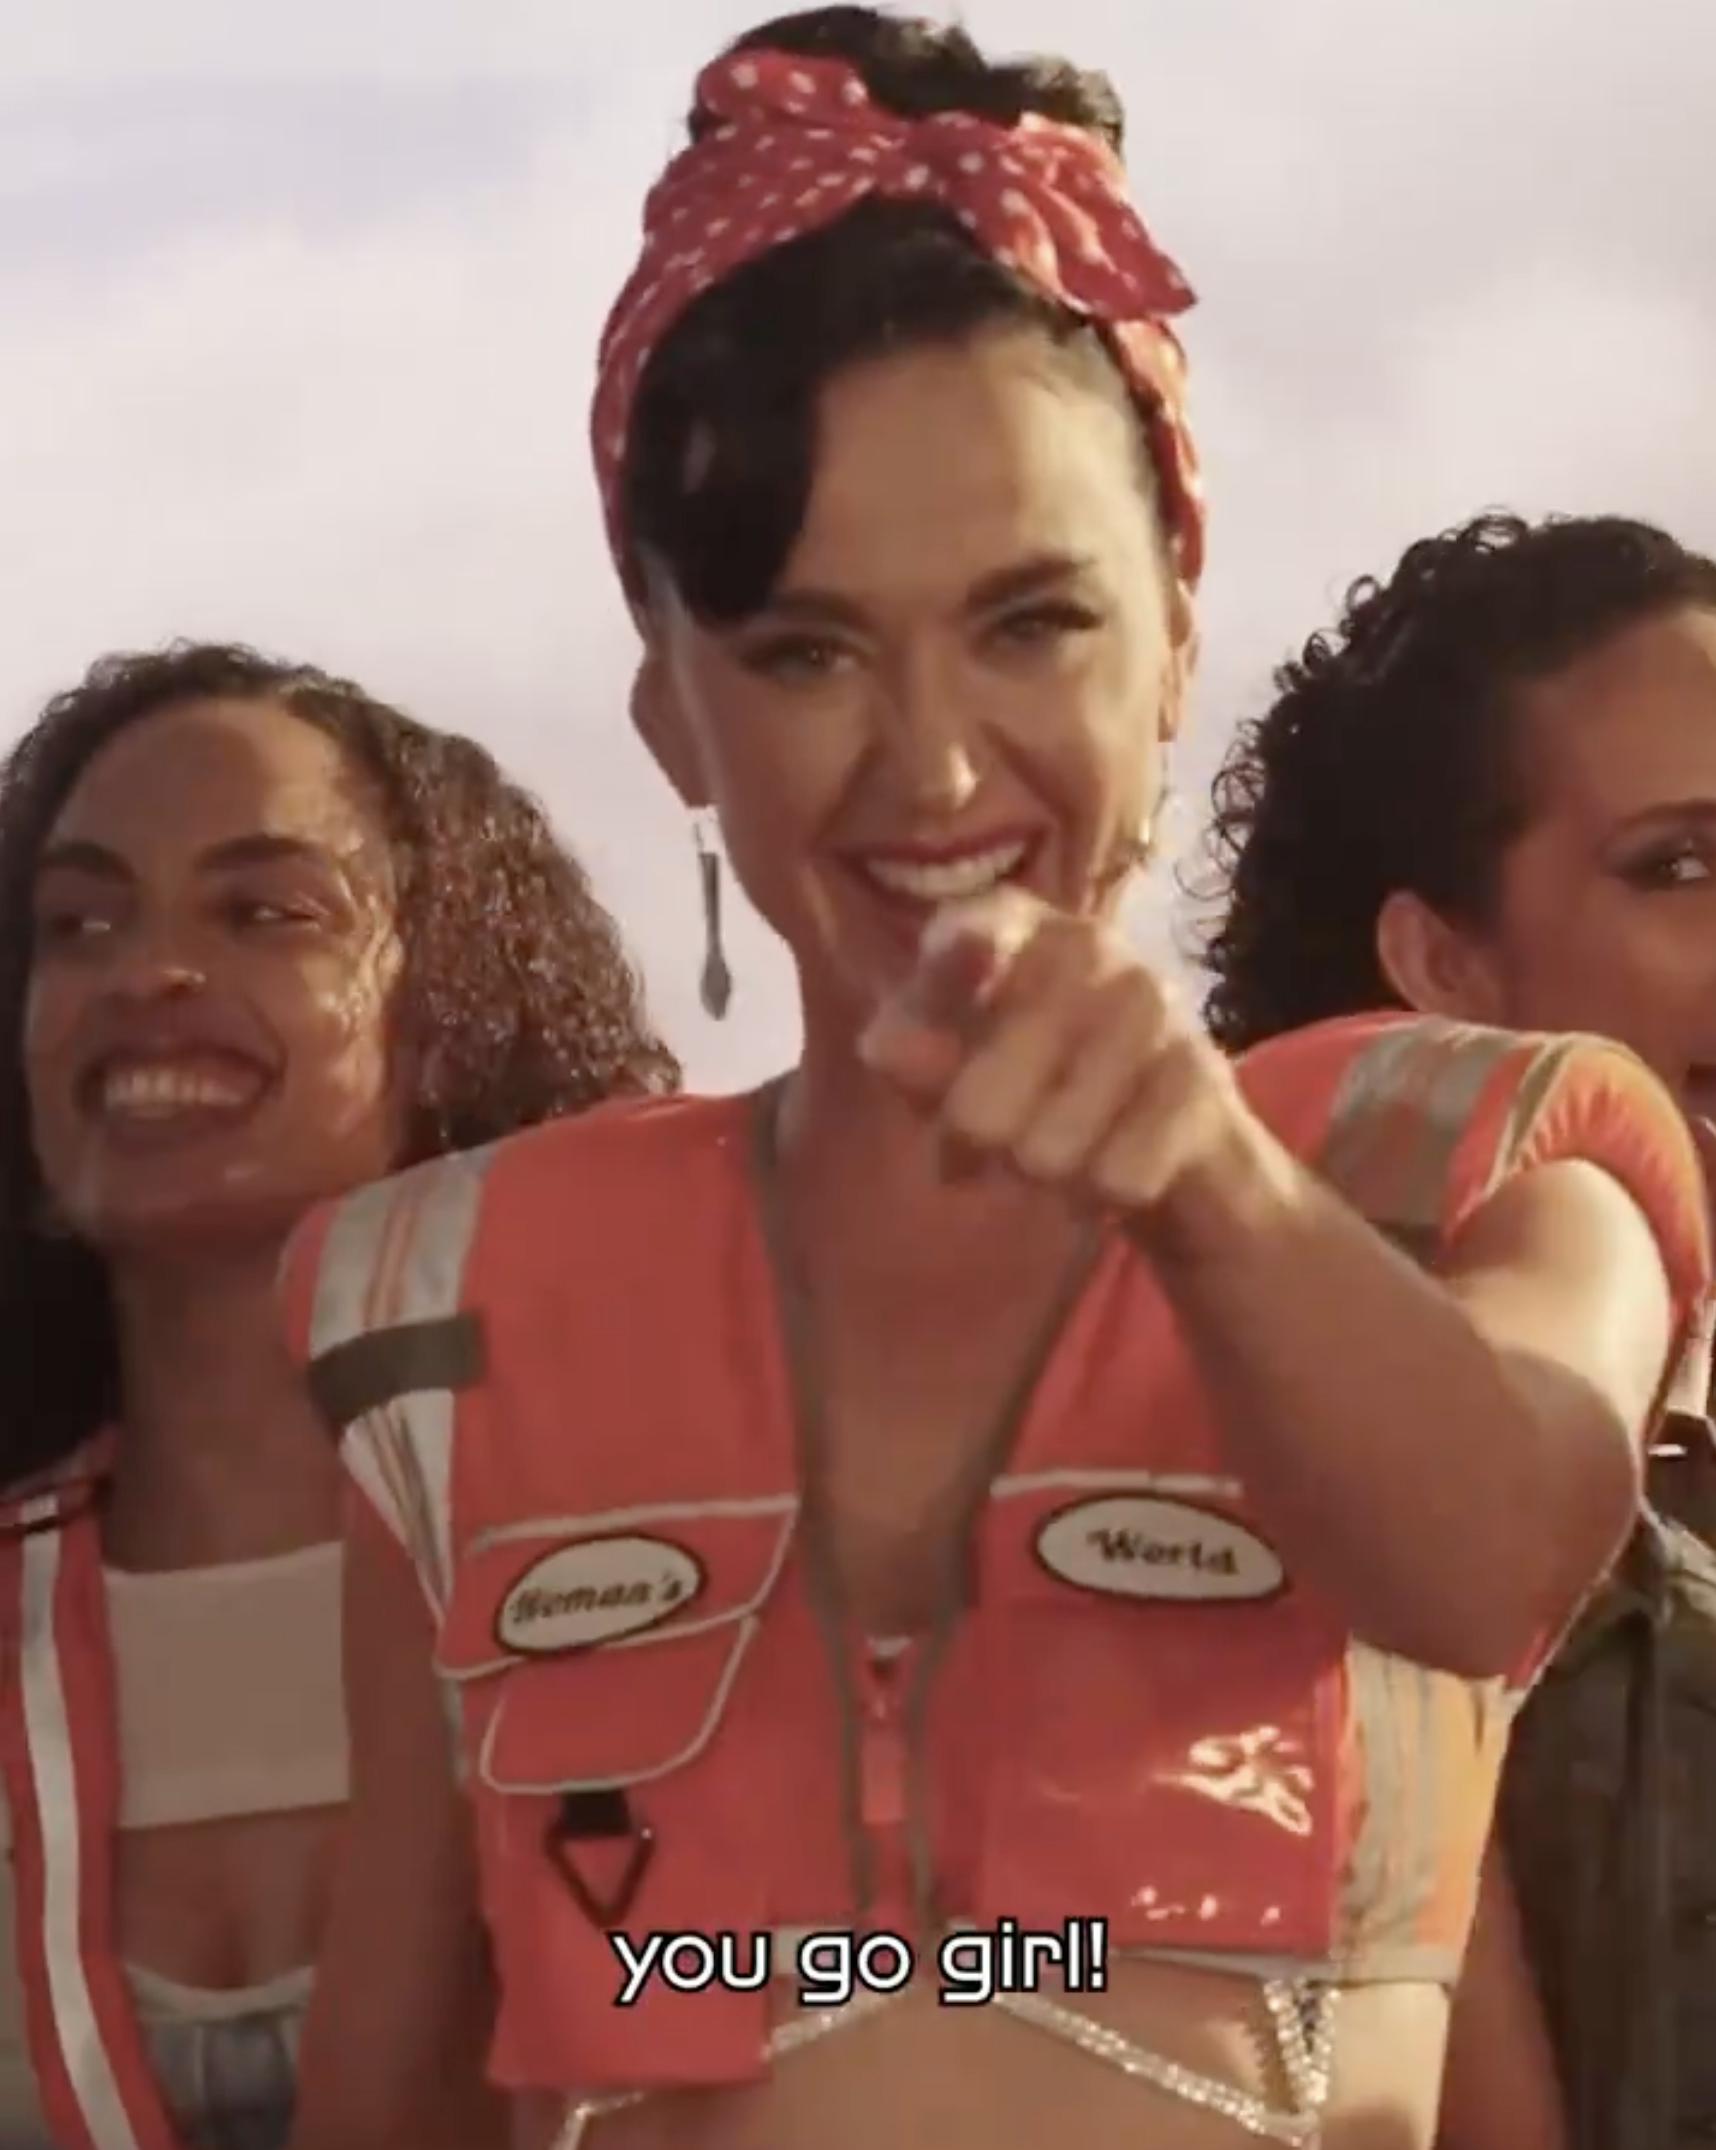 Katy Perry in the music video for her new song Woman's World